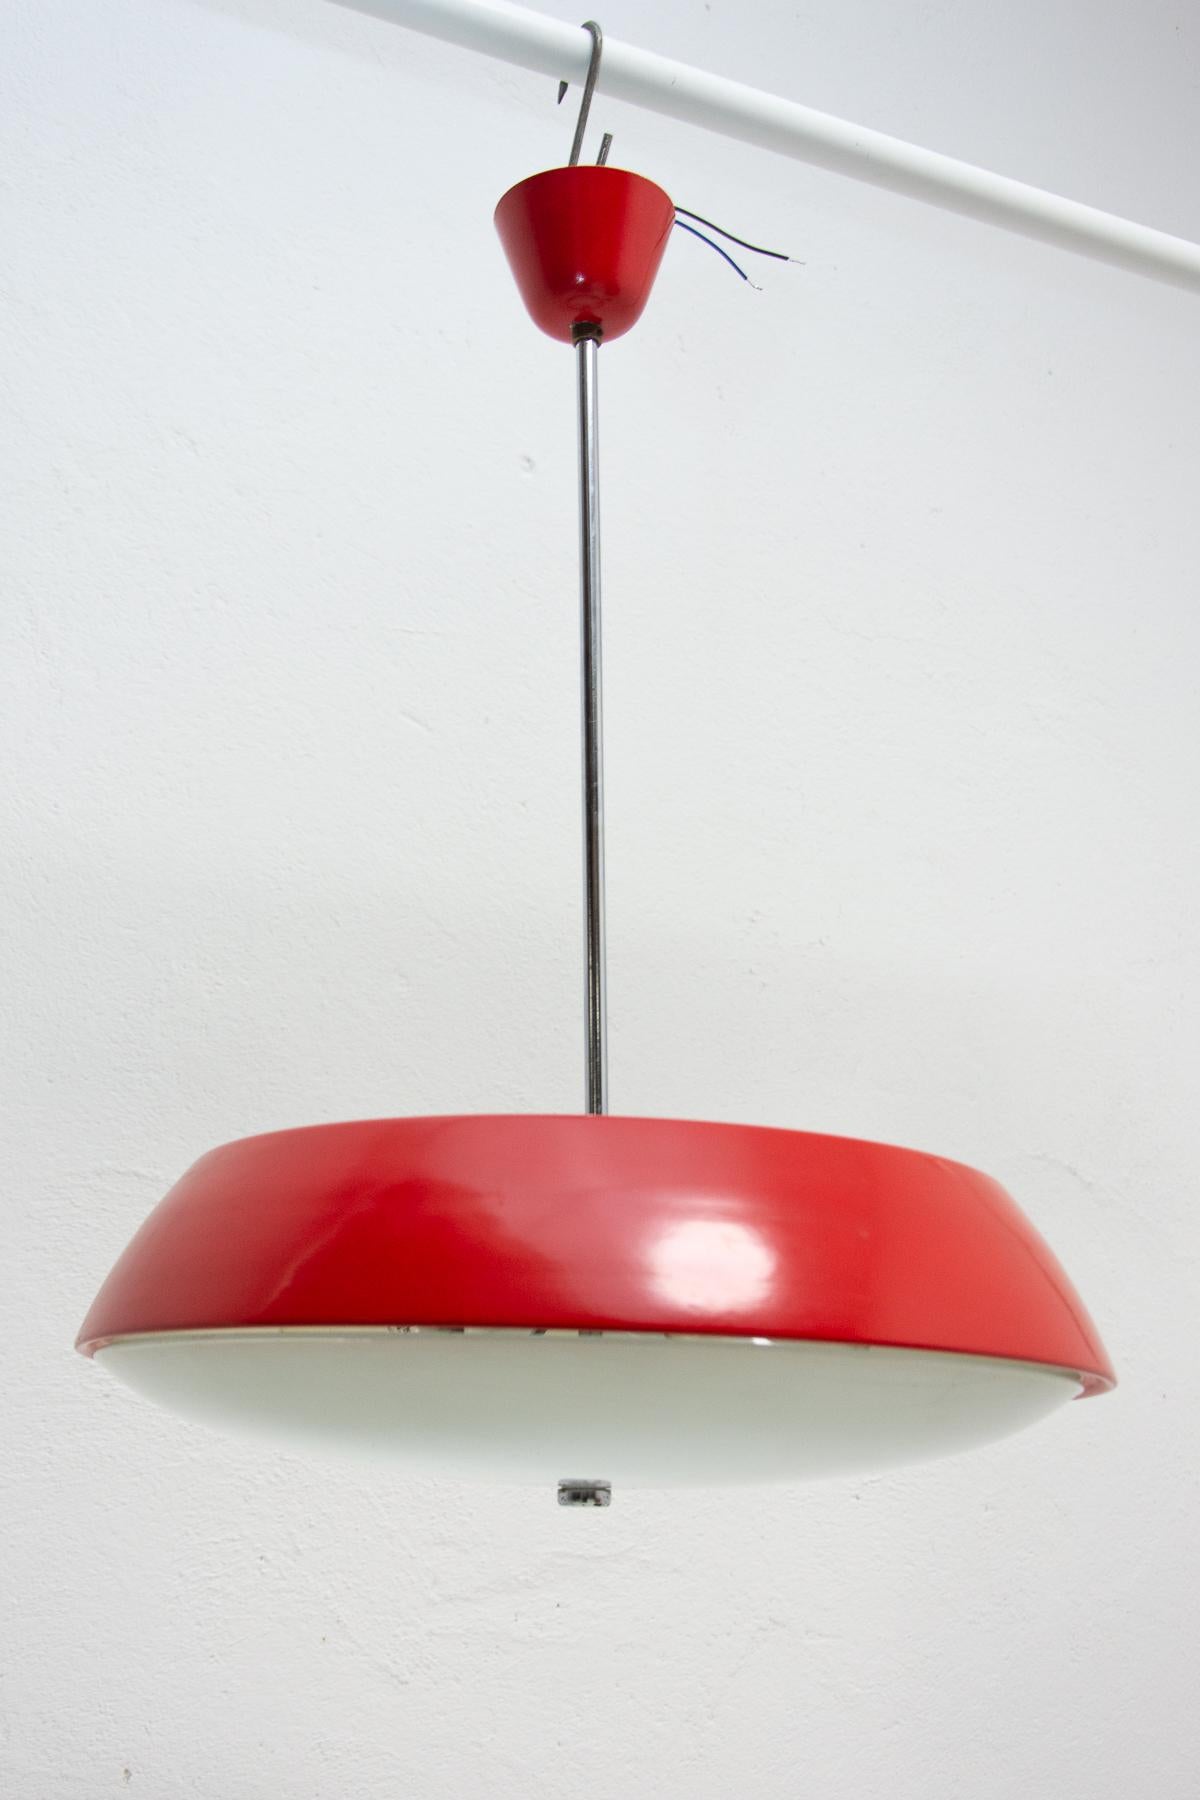 20th Century Midcentury Space-Age Pendant Lamp by Josef Hurka, Czechoslovakia, 1960s For Sale